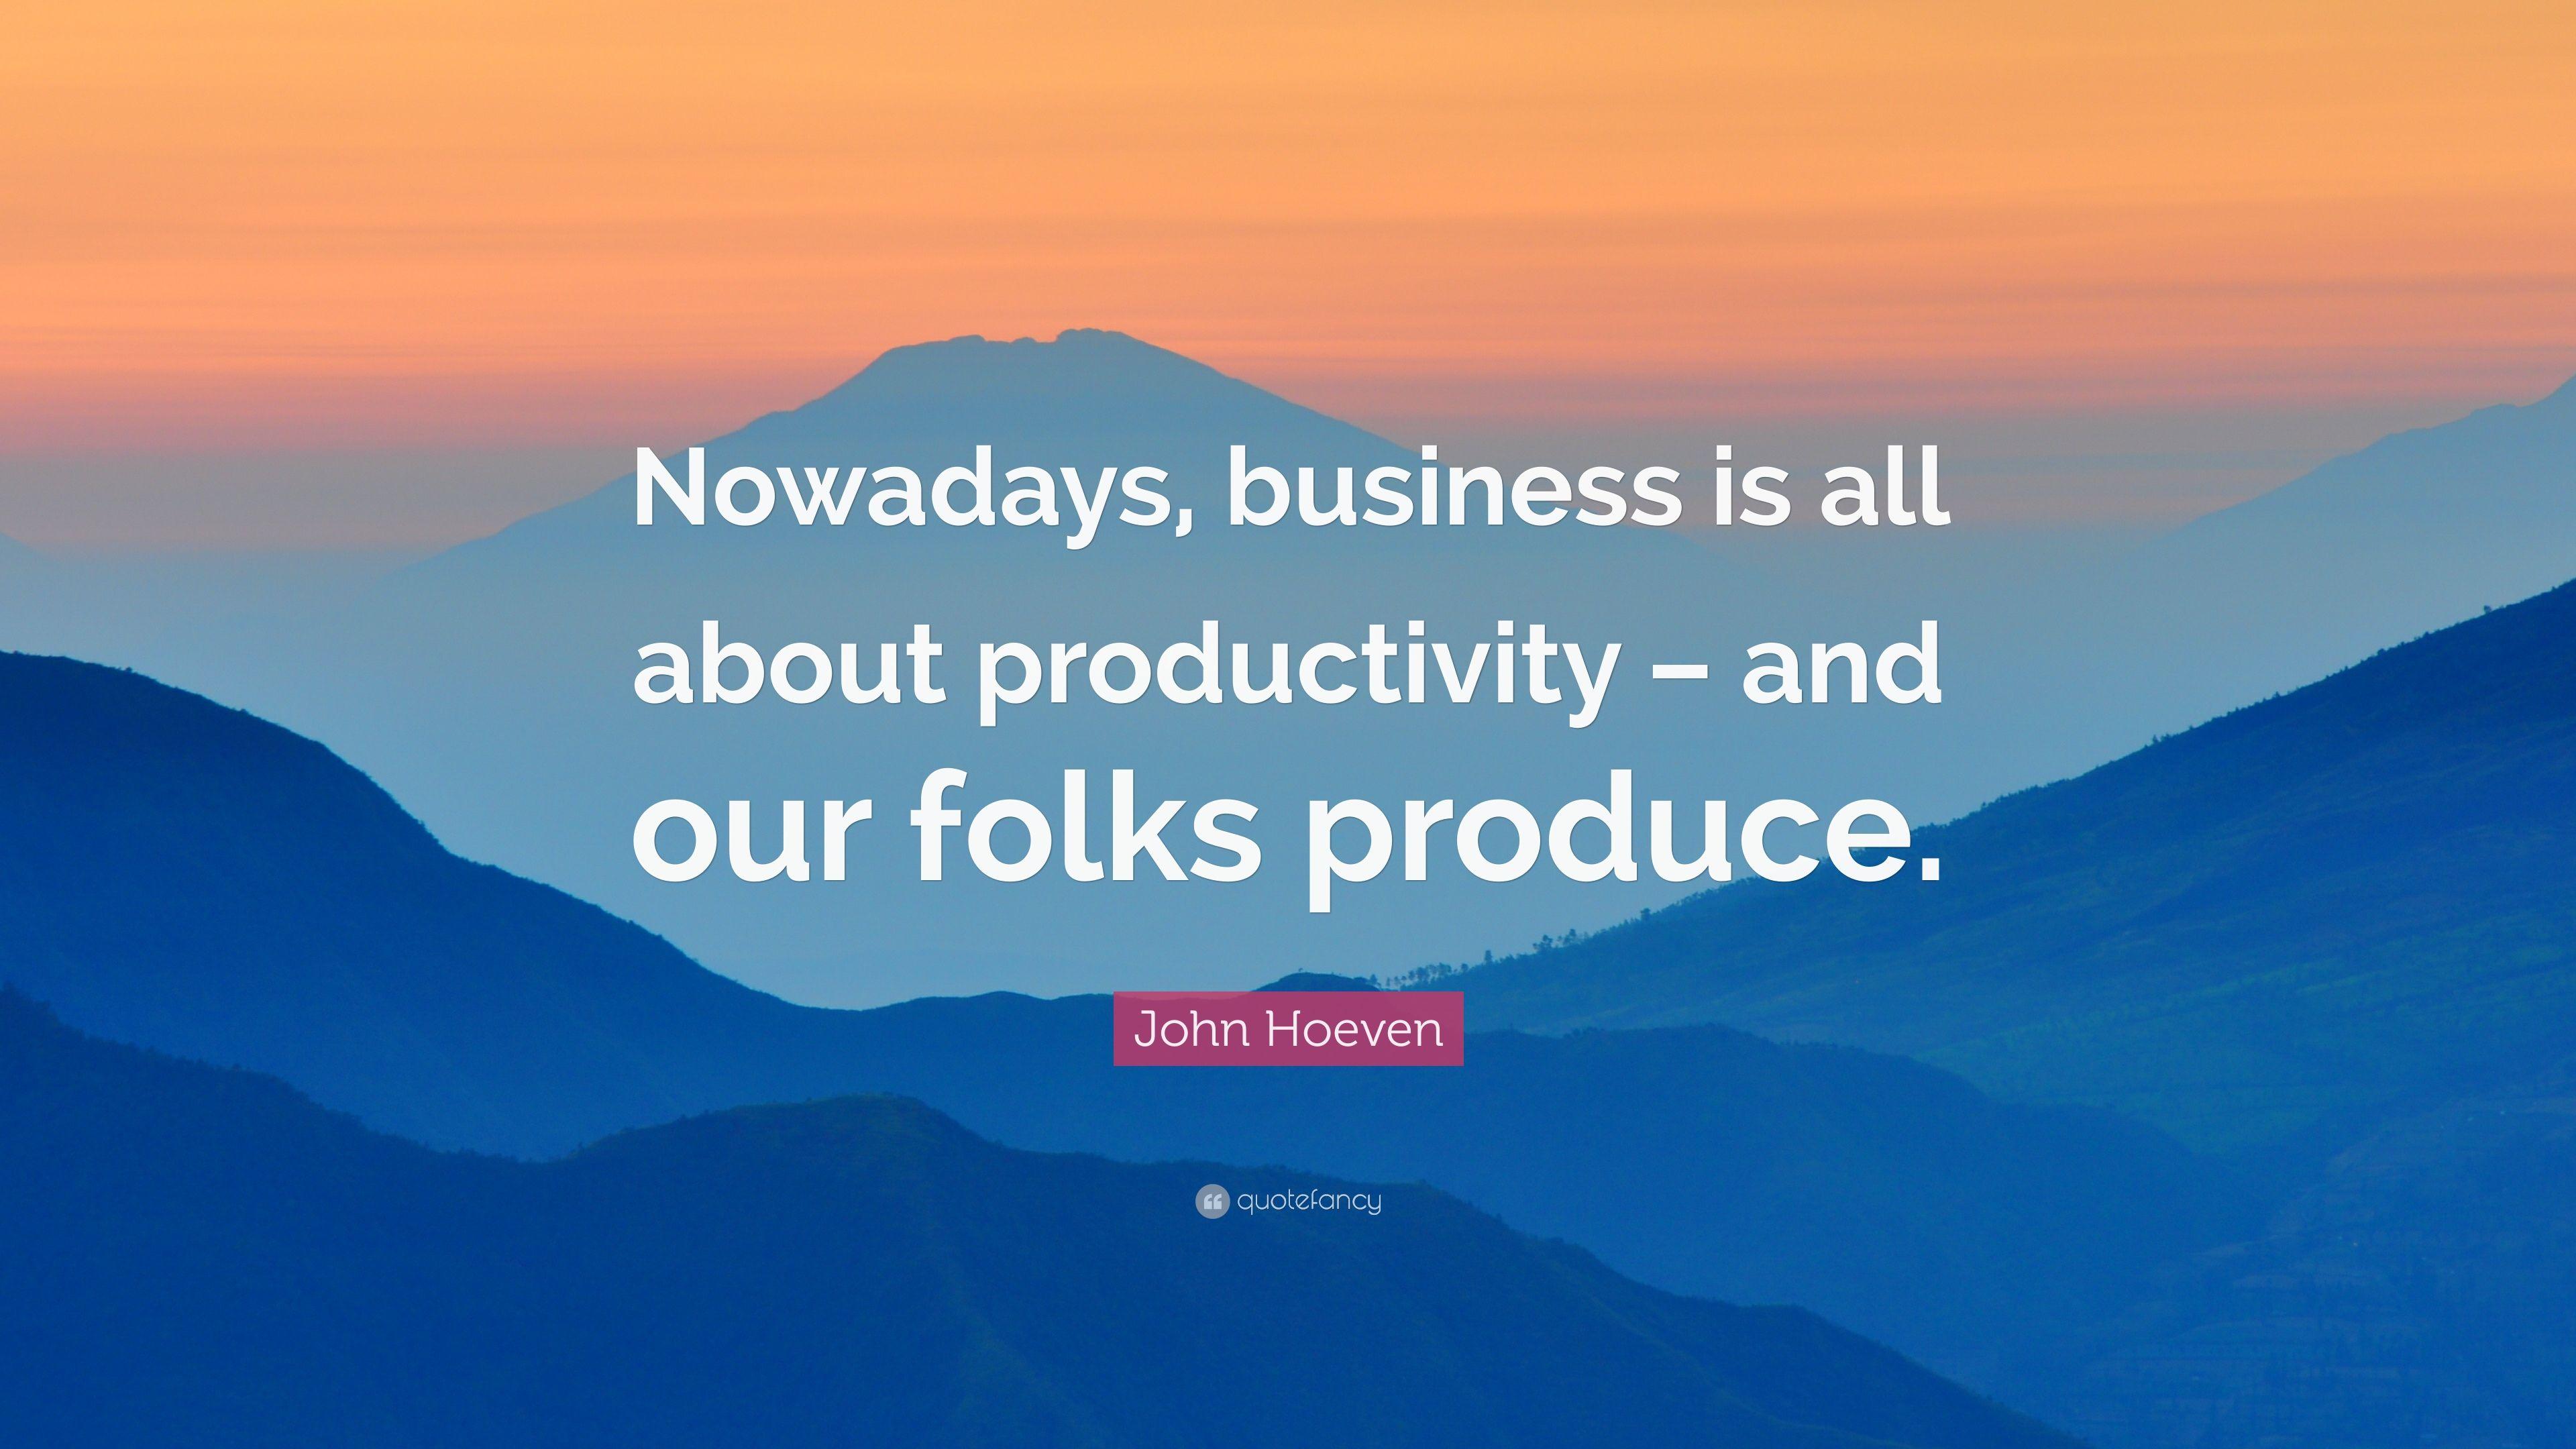 John Hoeven Quote: “Nowadays, business is all about productivity